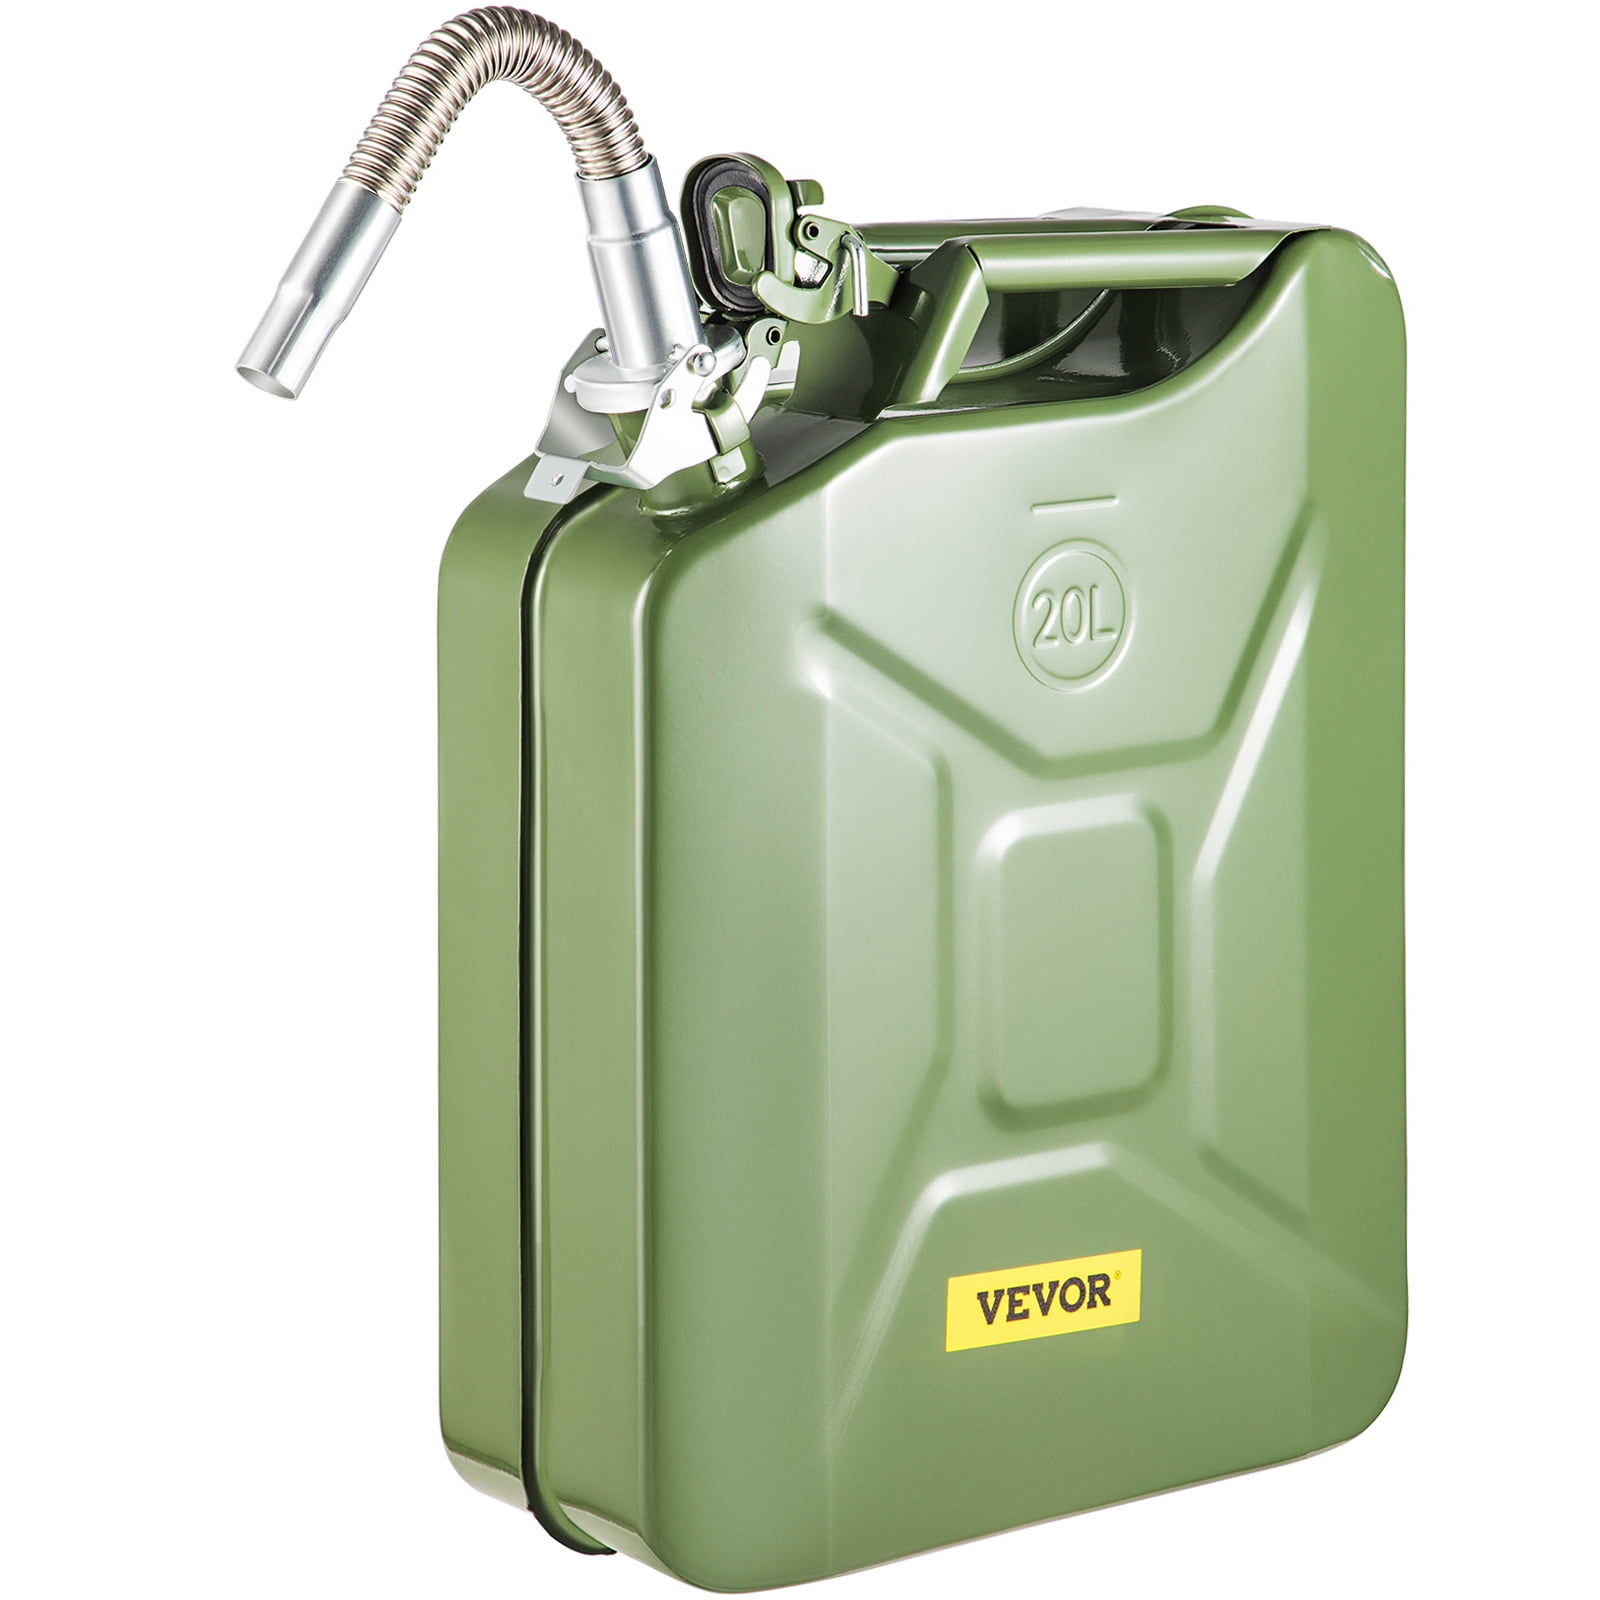 4xJerry Can 5 Gallon 20L Gas Gasoline Fuel Army NATO Military Metal Tank Steel 